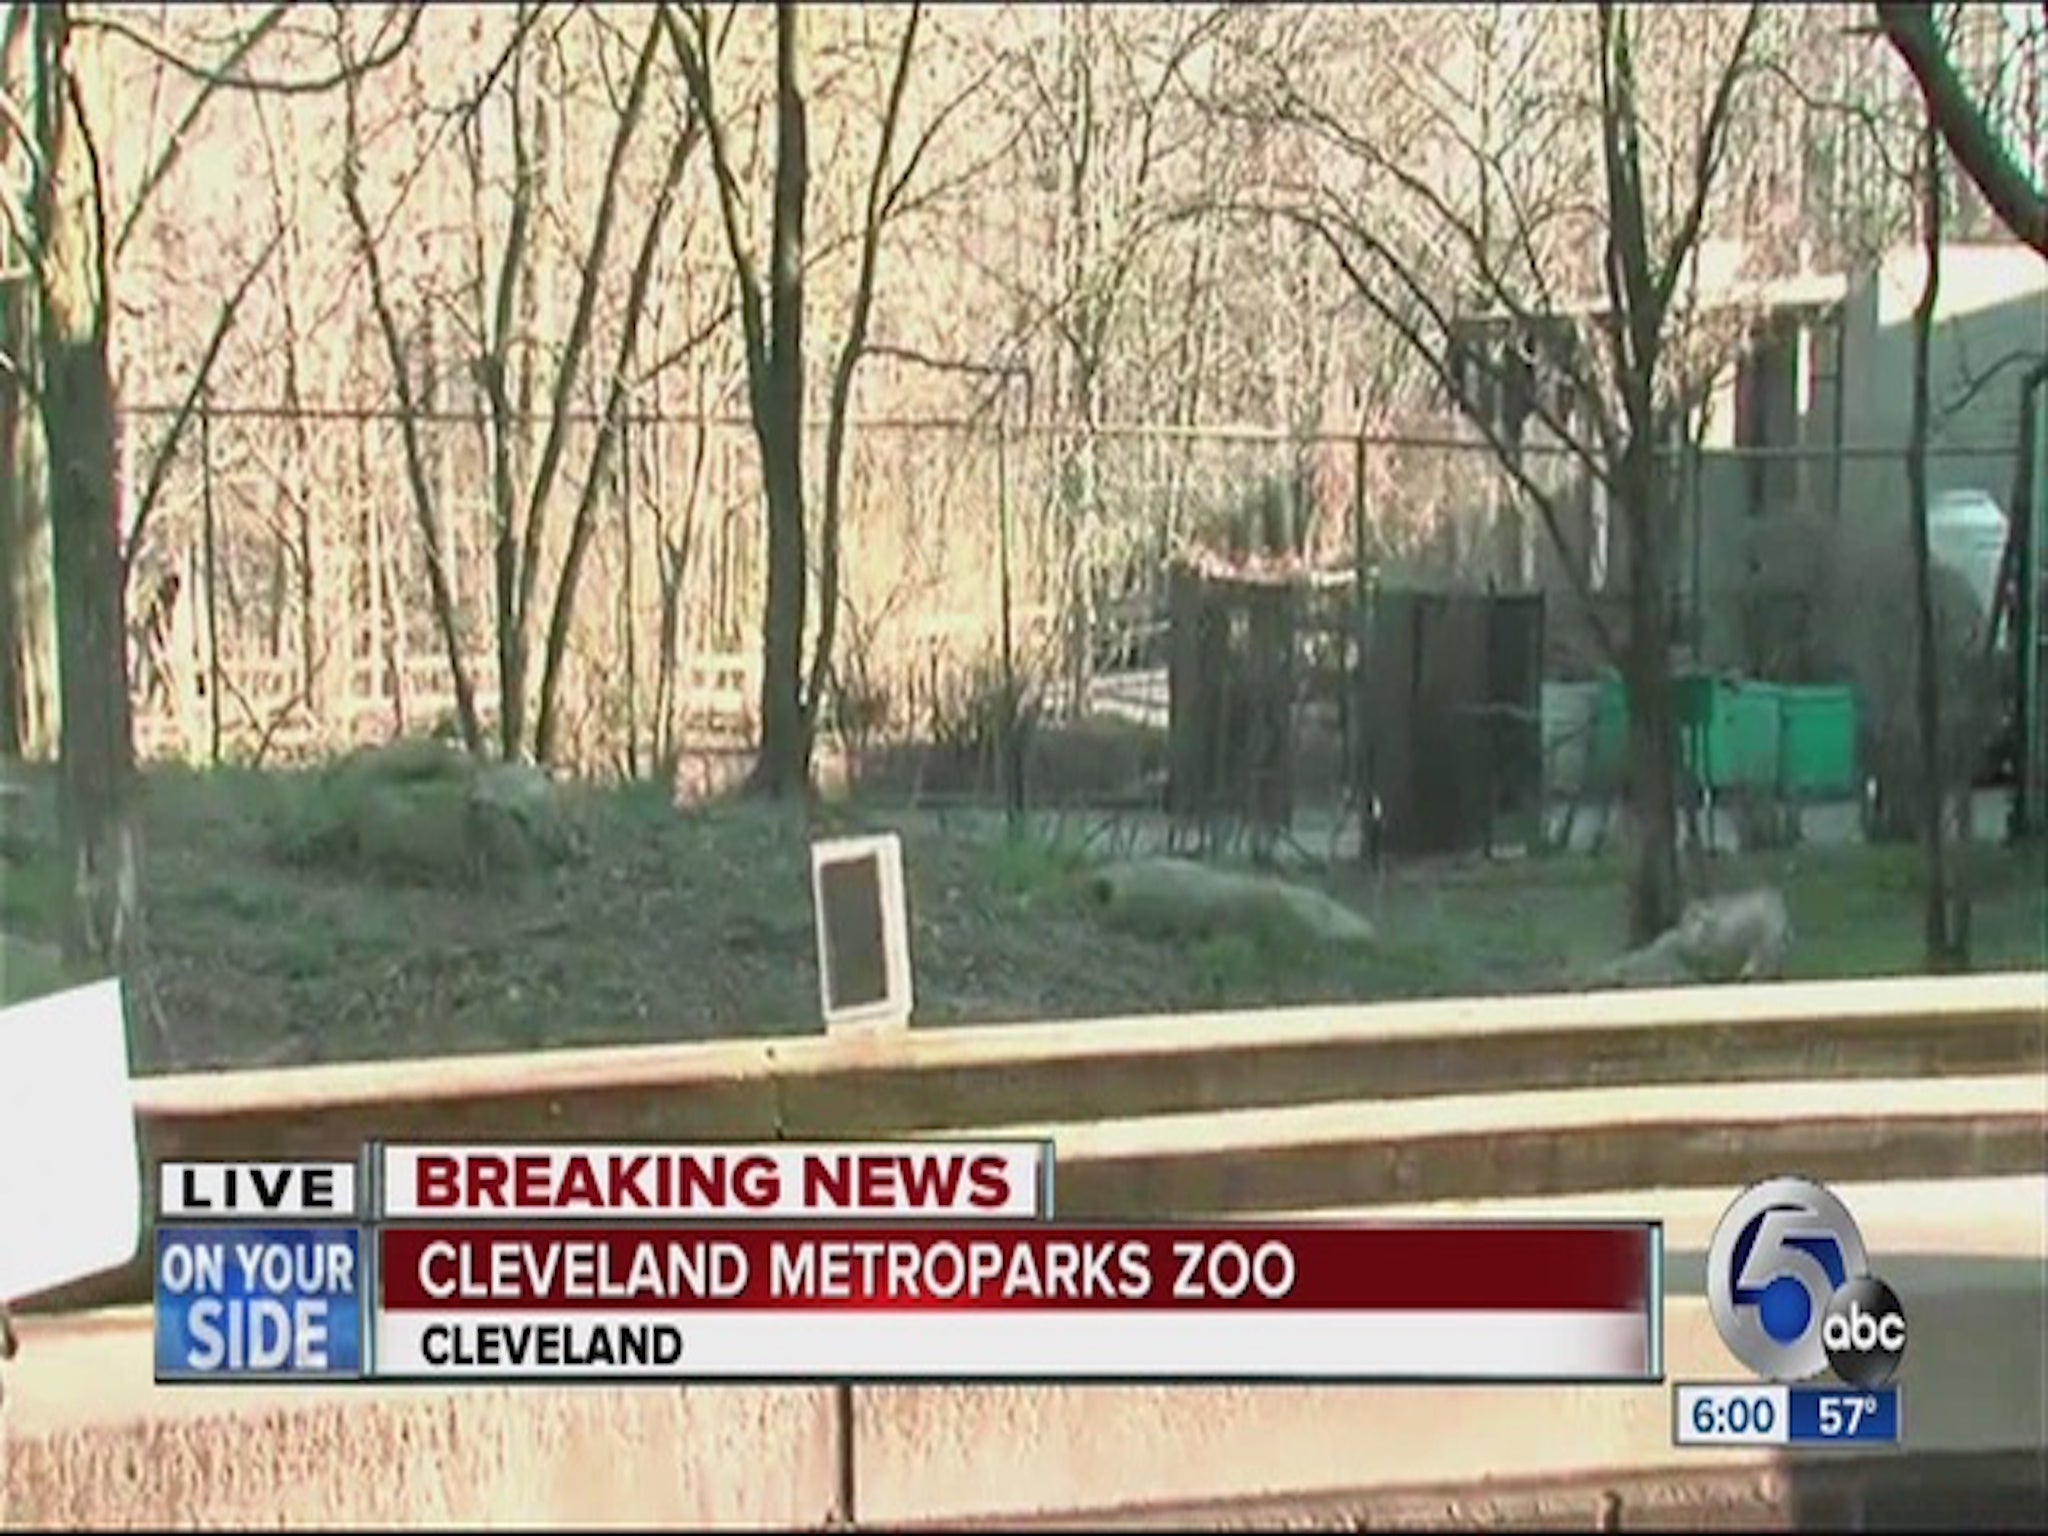 A toddler fell into the cheetah's enclosure at a Cleveland zoo